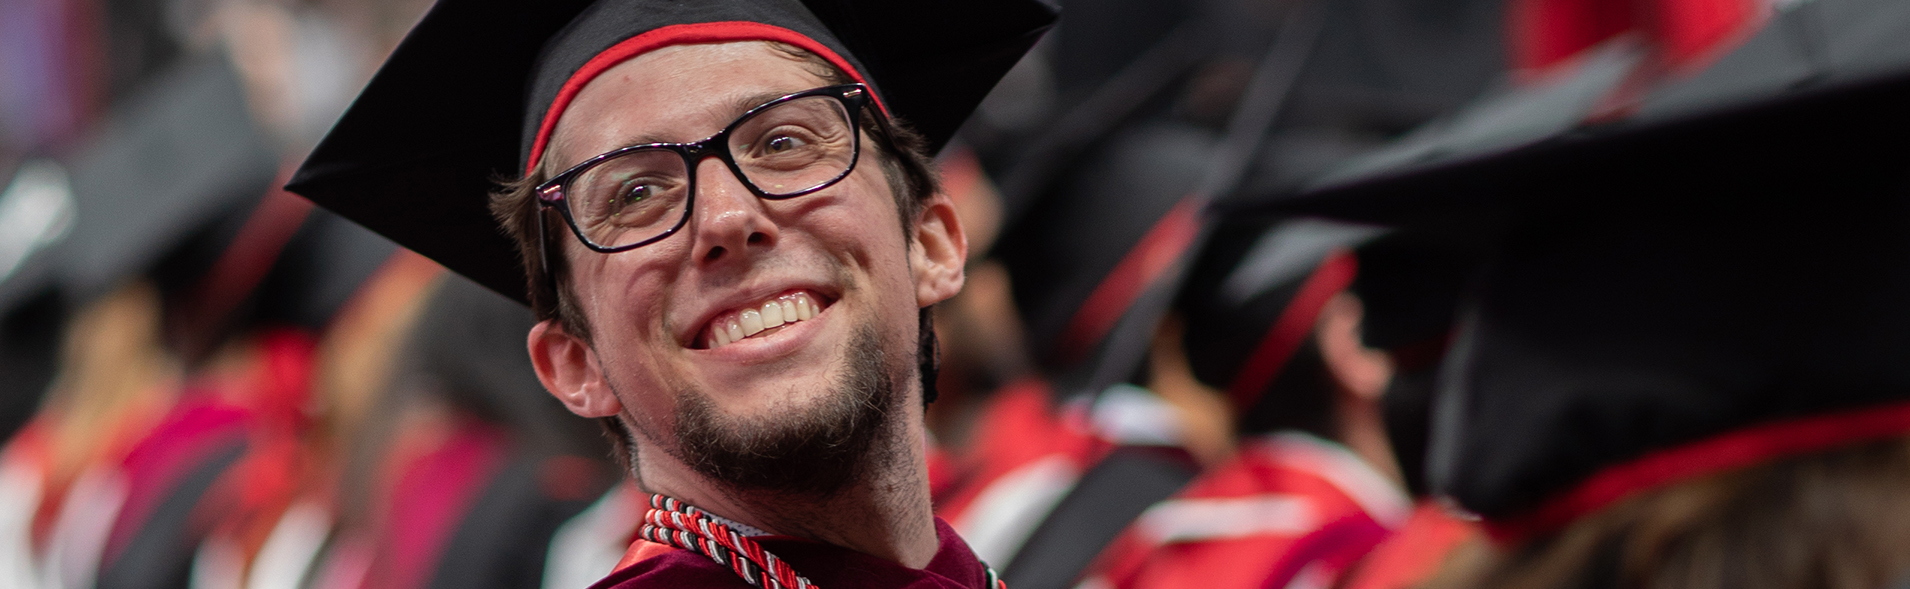 Graduate smiling at commencement ceremony